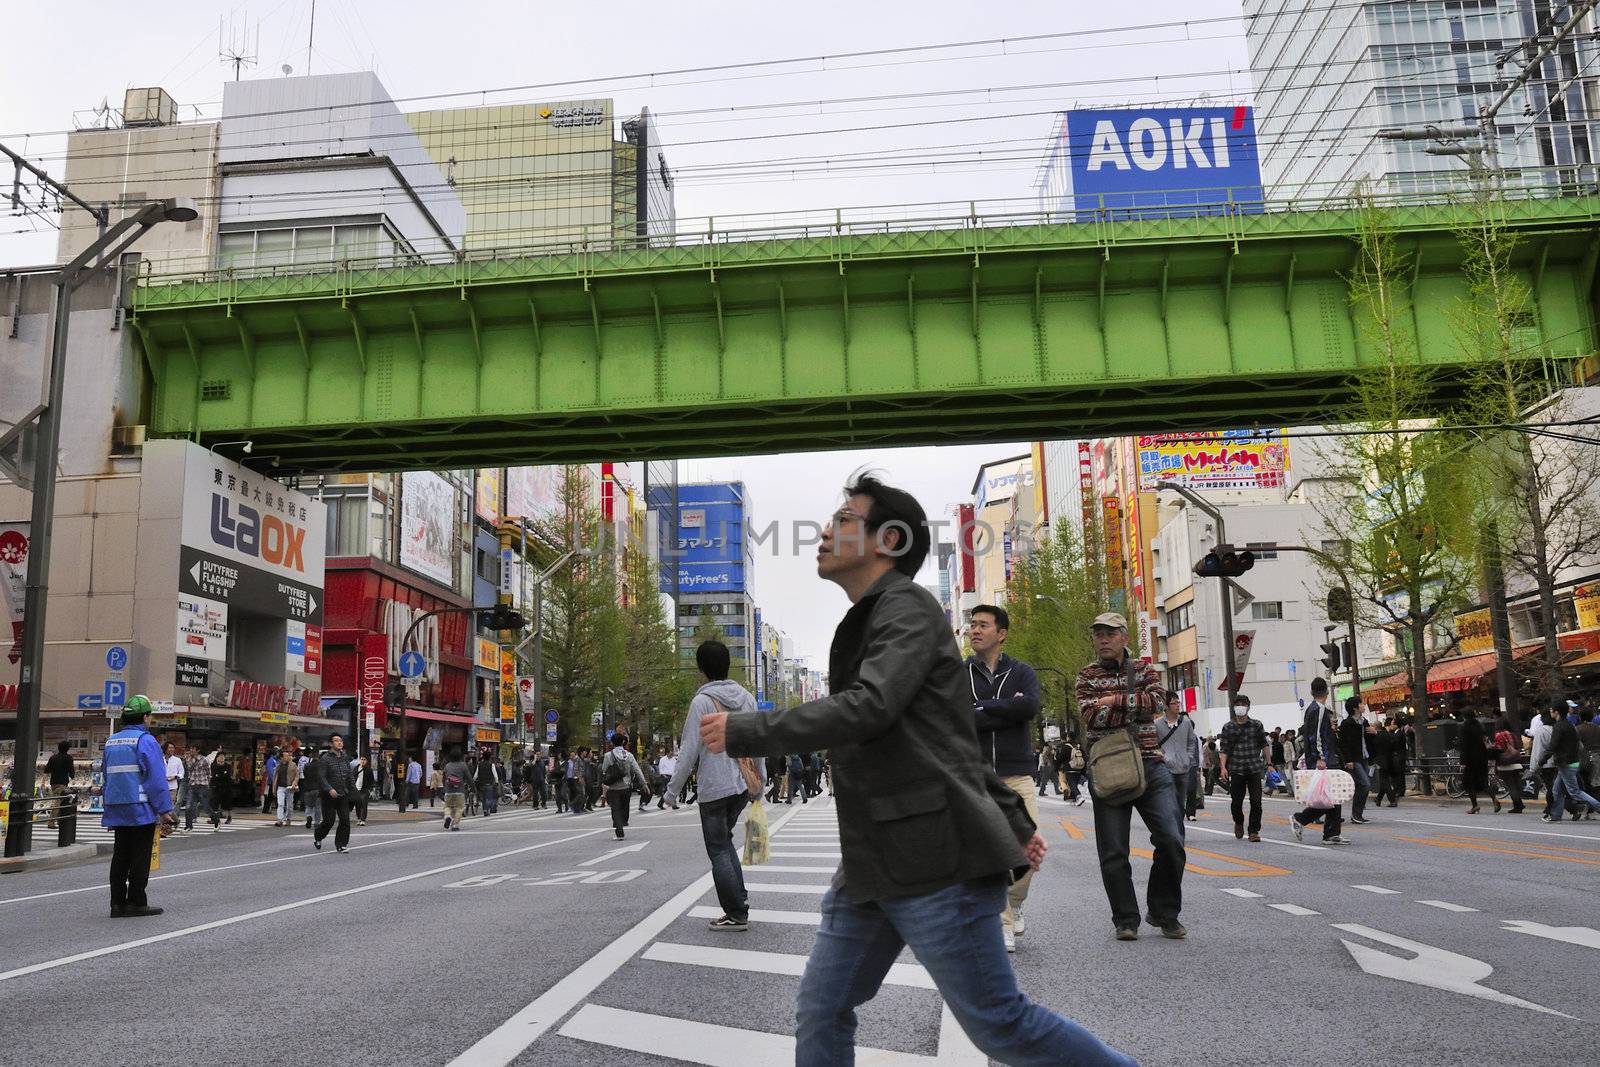 TOKYO, JAPAN -APRIL 17, 2011 : man crosses over street in Tokyo Alihabara area. Akihabara district is very crowded and closed for car traffic every Sunday, so pedestrians walks freely inside biggest and worldwide famous electronics market area.  